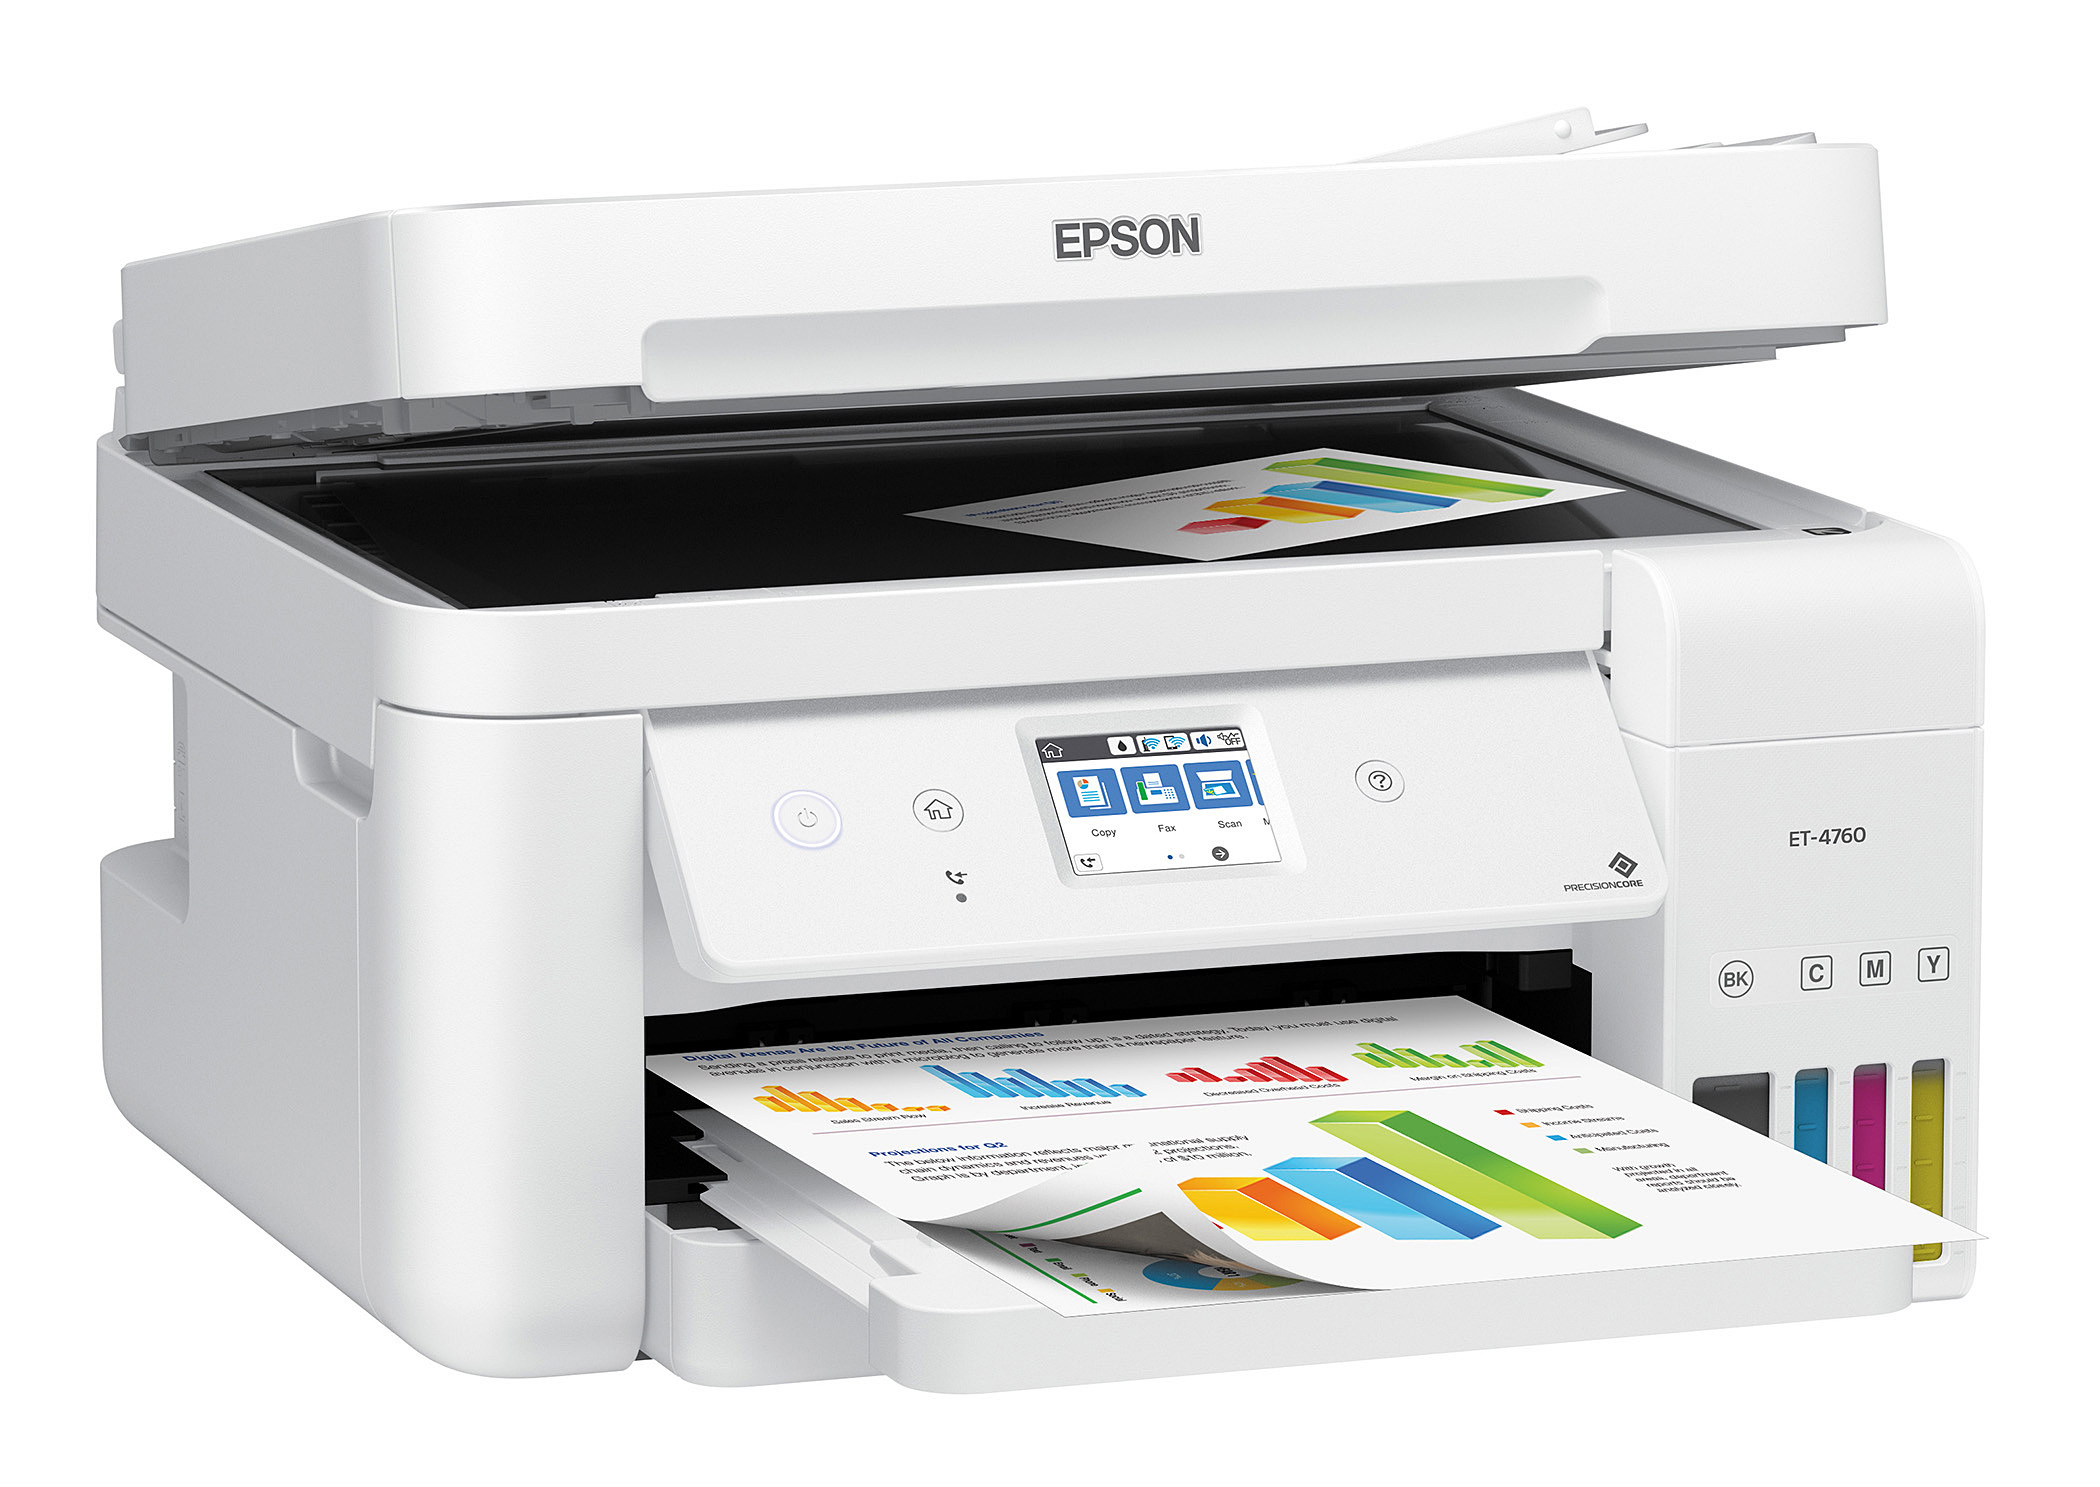 Epson EcoTank ET-4760 All-In-One Printer Review